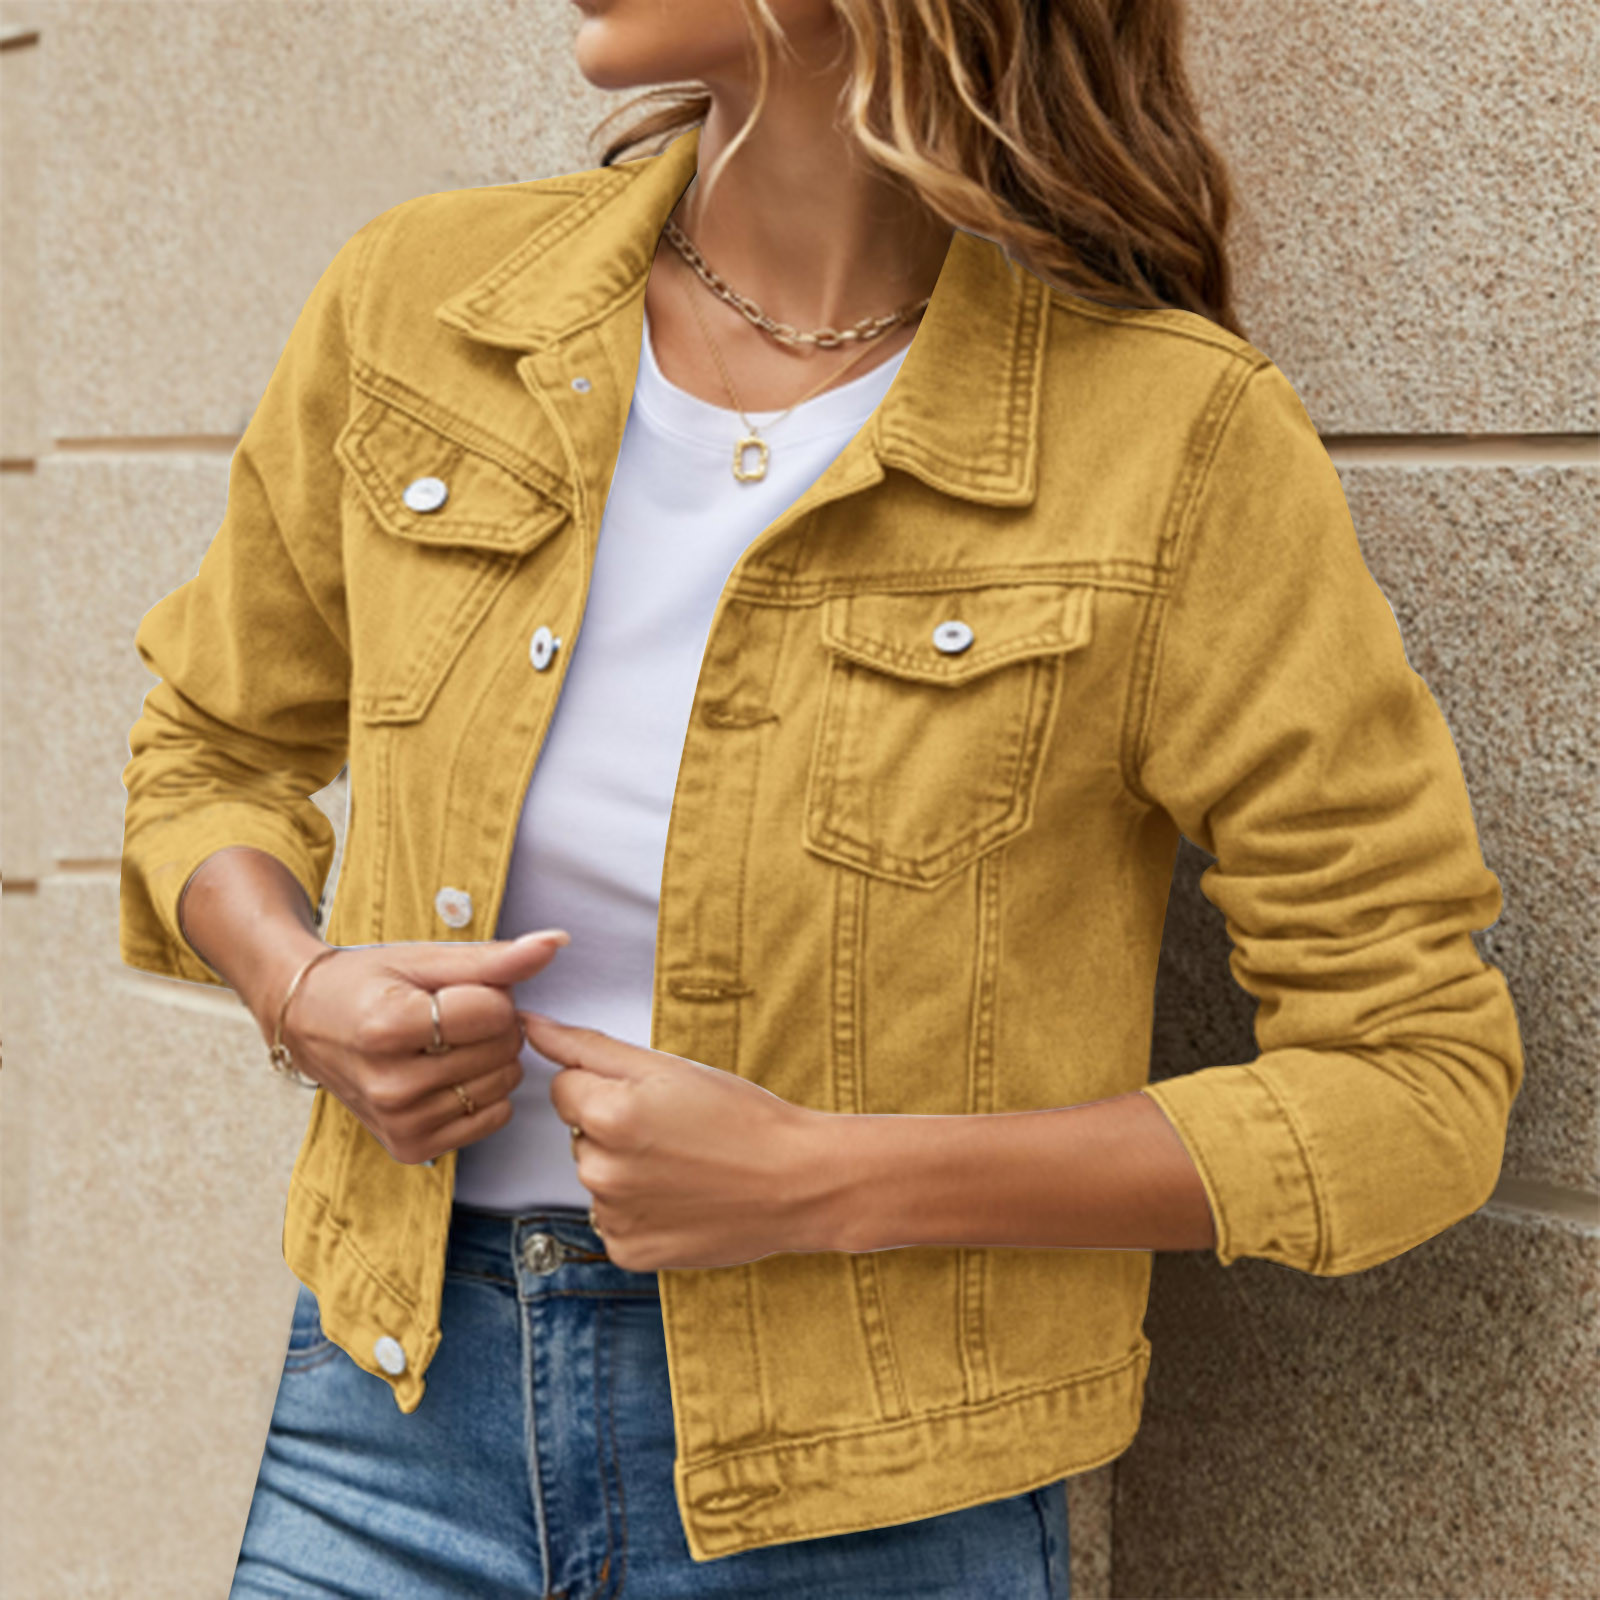 iOPQO womens sweaters Women's Basic Solid Color Button Down Denim Cotton Jacket With Pockets Denim Jacket Coat Women's Denim Jackets Yellow XXL - image 2 of 8